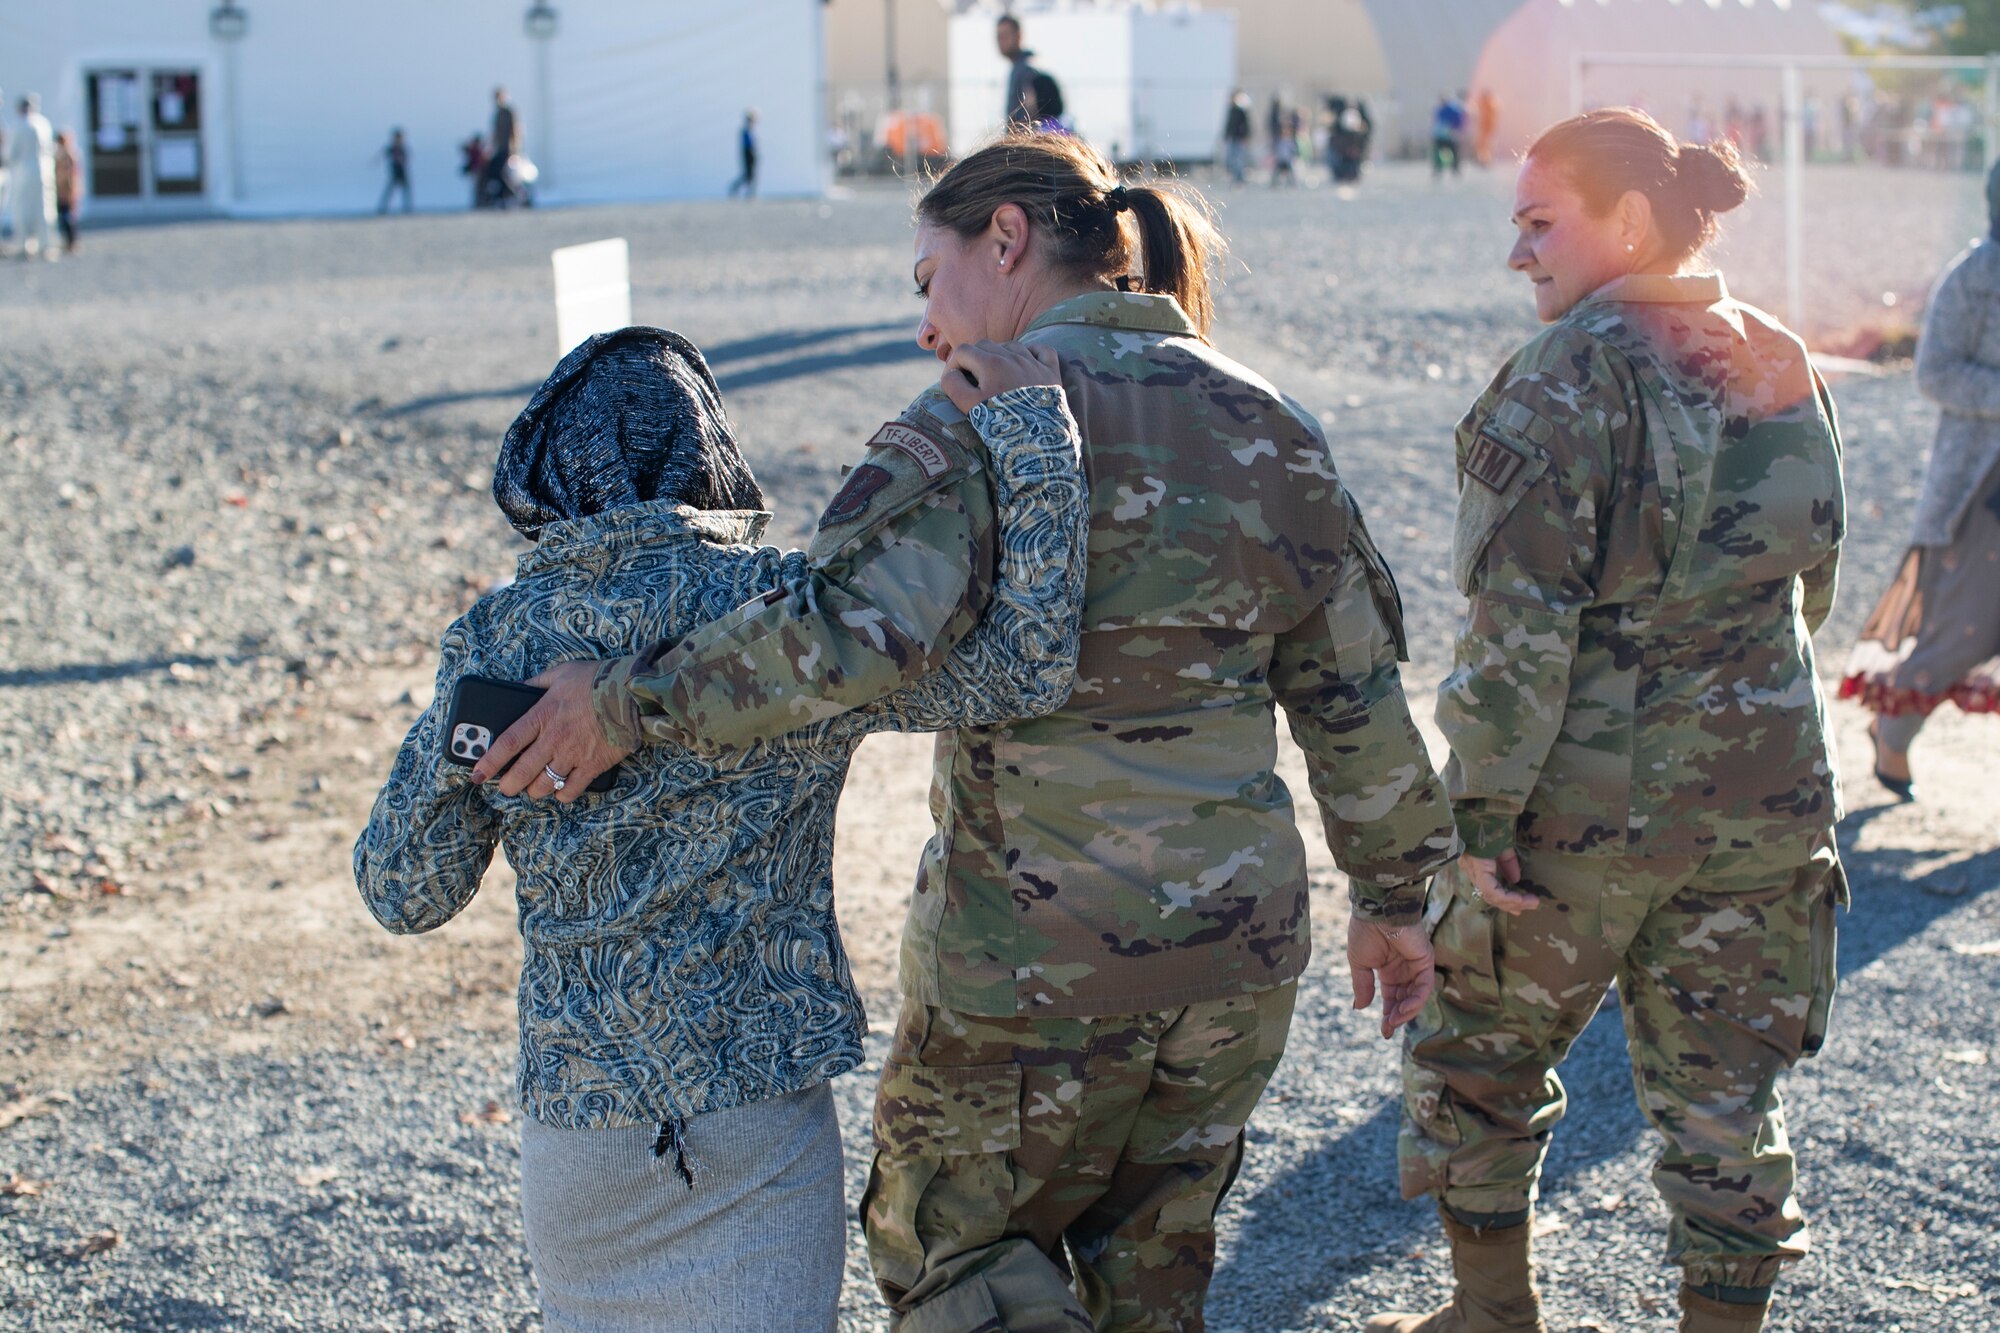 U.S. Air Force Col. Bernadette Maldonado and Lt. Col. April Doolittle, New Jersey Air National Guardsmen assigned to the 108th Wing, walk with an Afghan girl in Liberty Village on Joint Base McGuire-Dix-Lakehurst, N.J., Nov. 8, 2021. The Department of Defense, through U.S. Northern Command, and in support of the Department of Homeland Security, is providing transportation, temporary housing, medical screening, and general support for at least 50,000 Afghan evacuees at suitable facilities, in permanent or temporary structures, as quickly as possible. This initiative provides Afghan personnel essential support at secure locations outside Afghanistan.